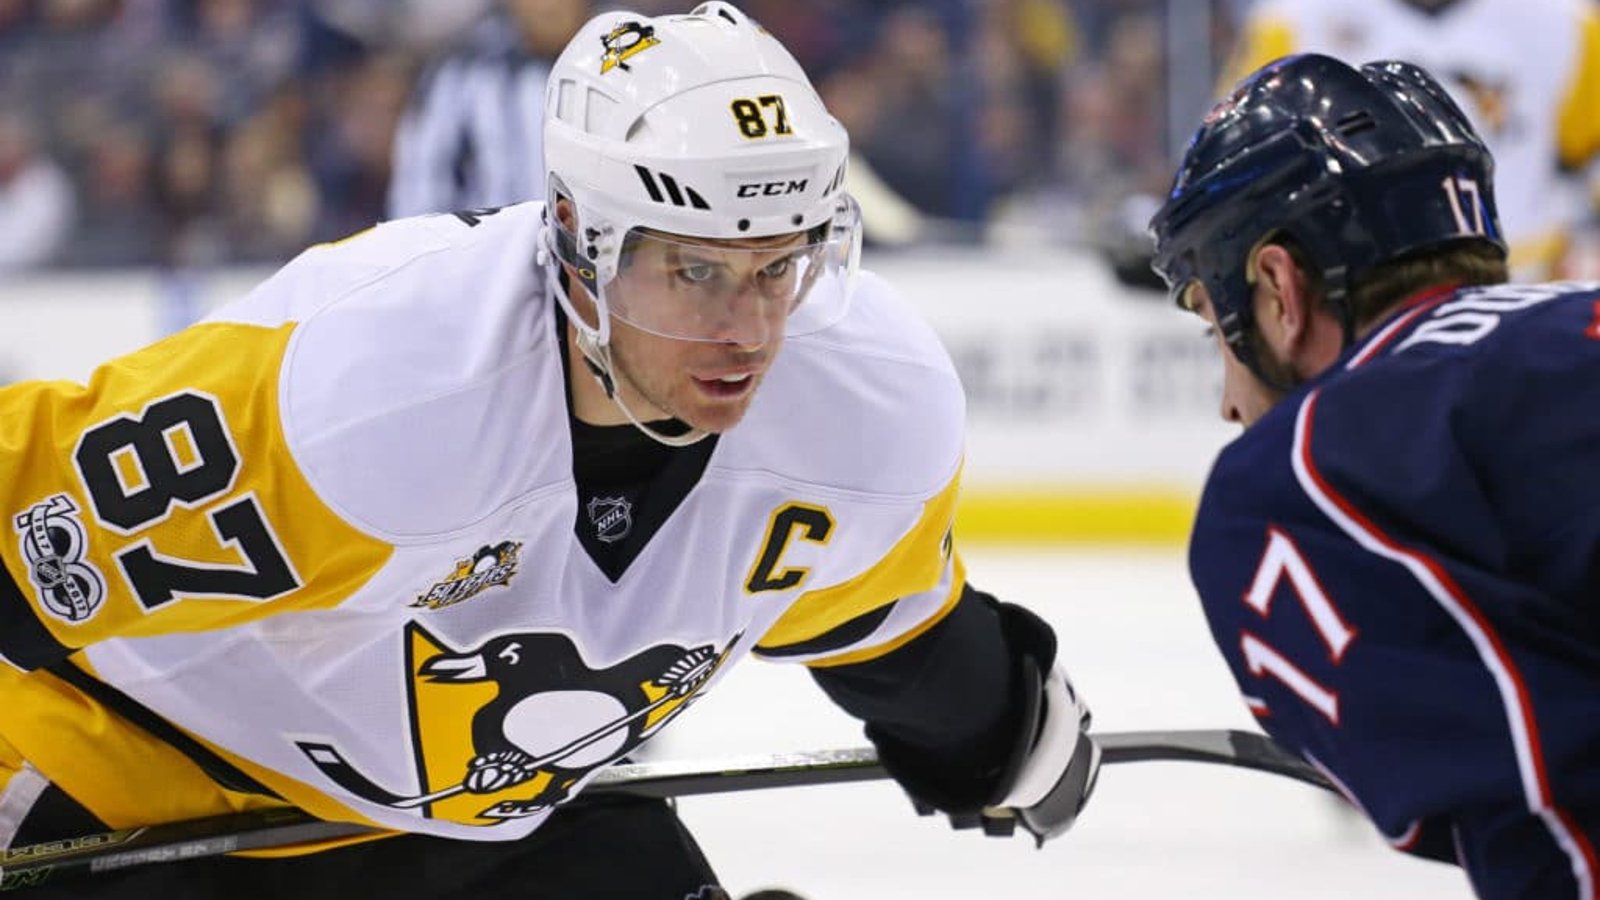 Sidney Crosby fans flip out at Brandon Dubinsky for insulting the star player 